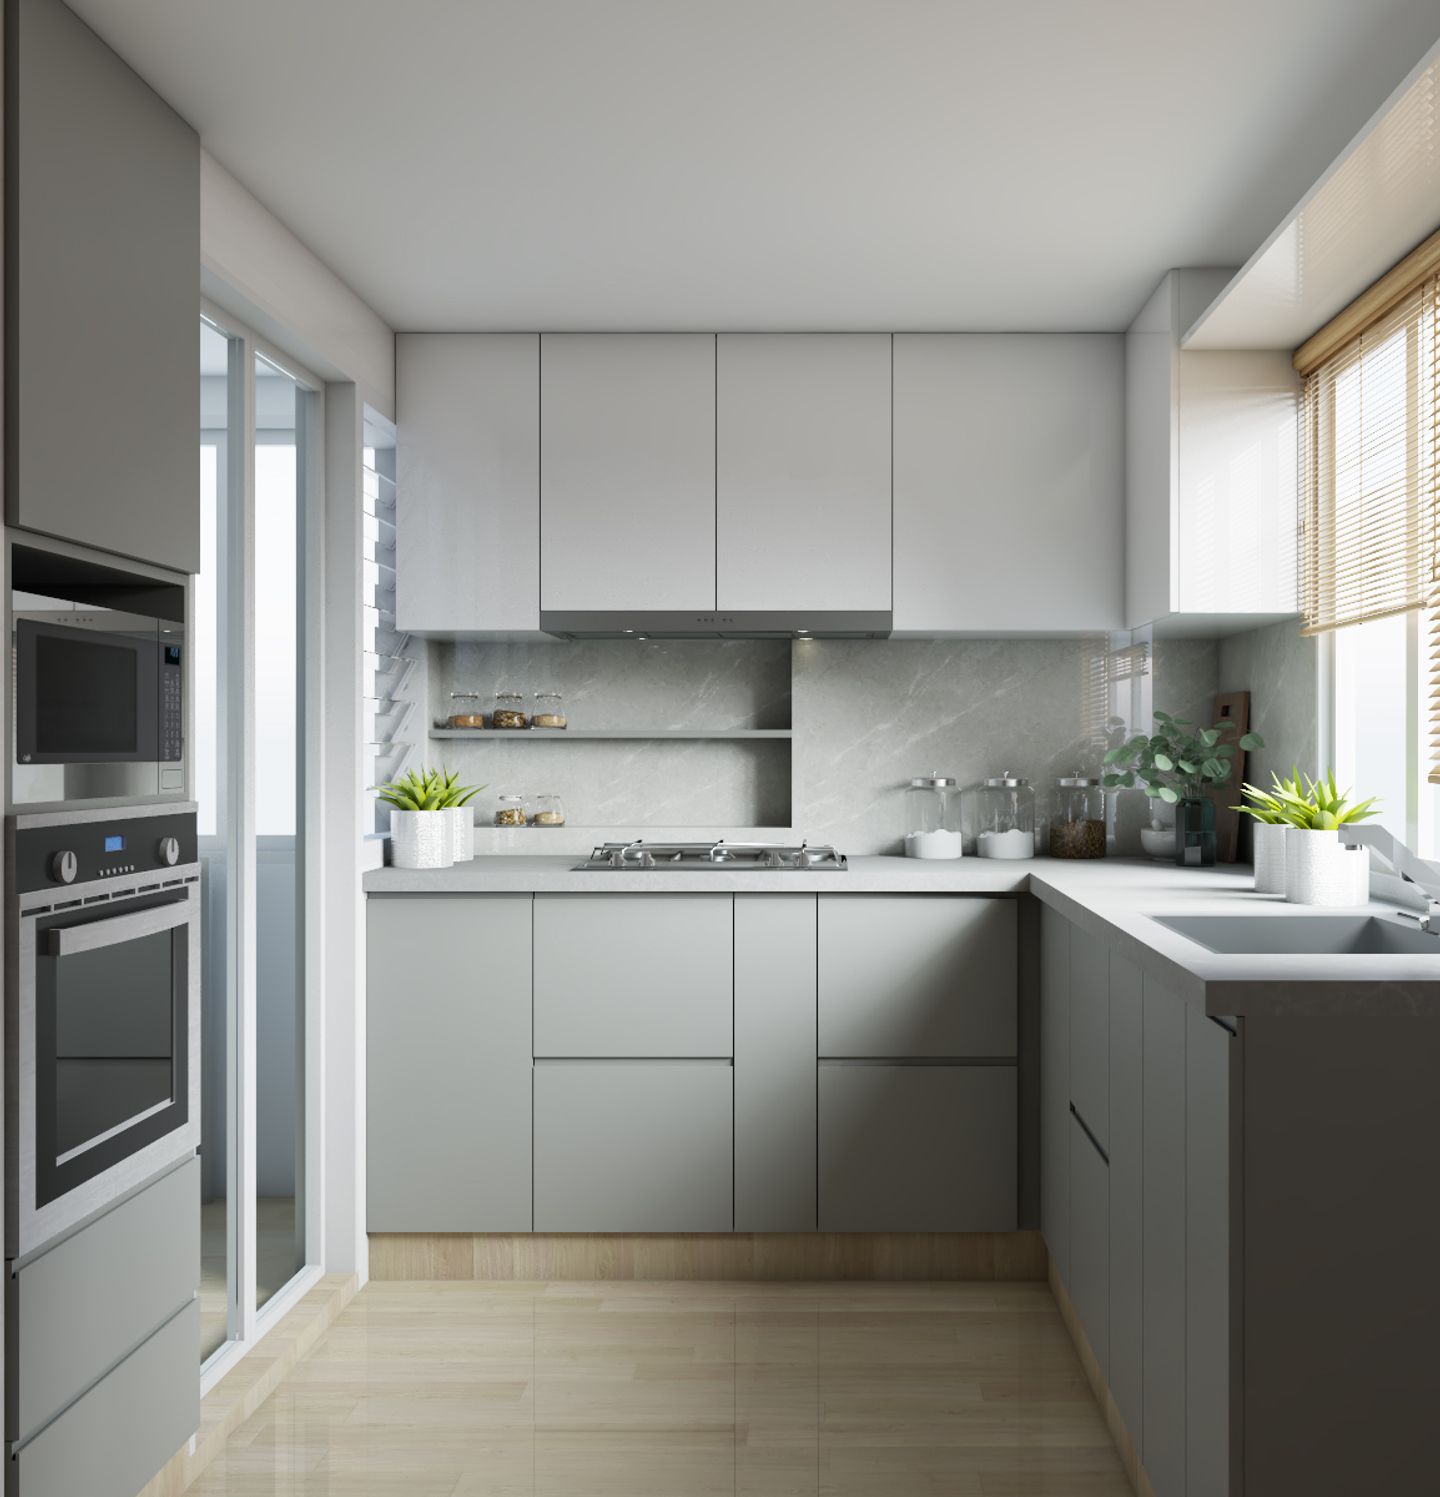 Bright And Compact Modular Kitchen With Built-In Appliances - Livspace